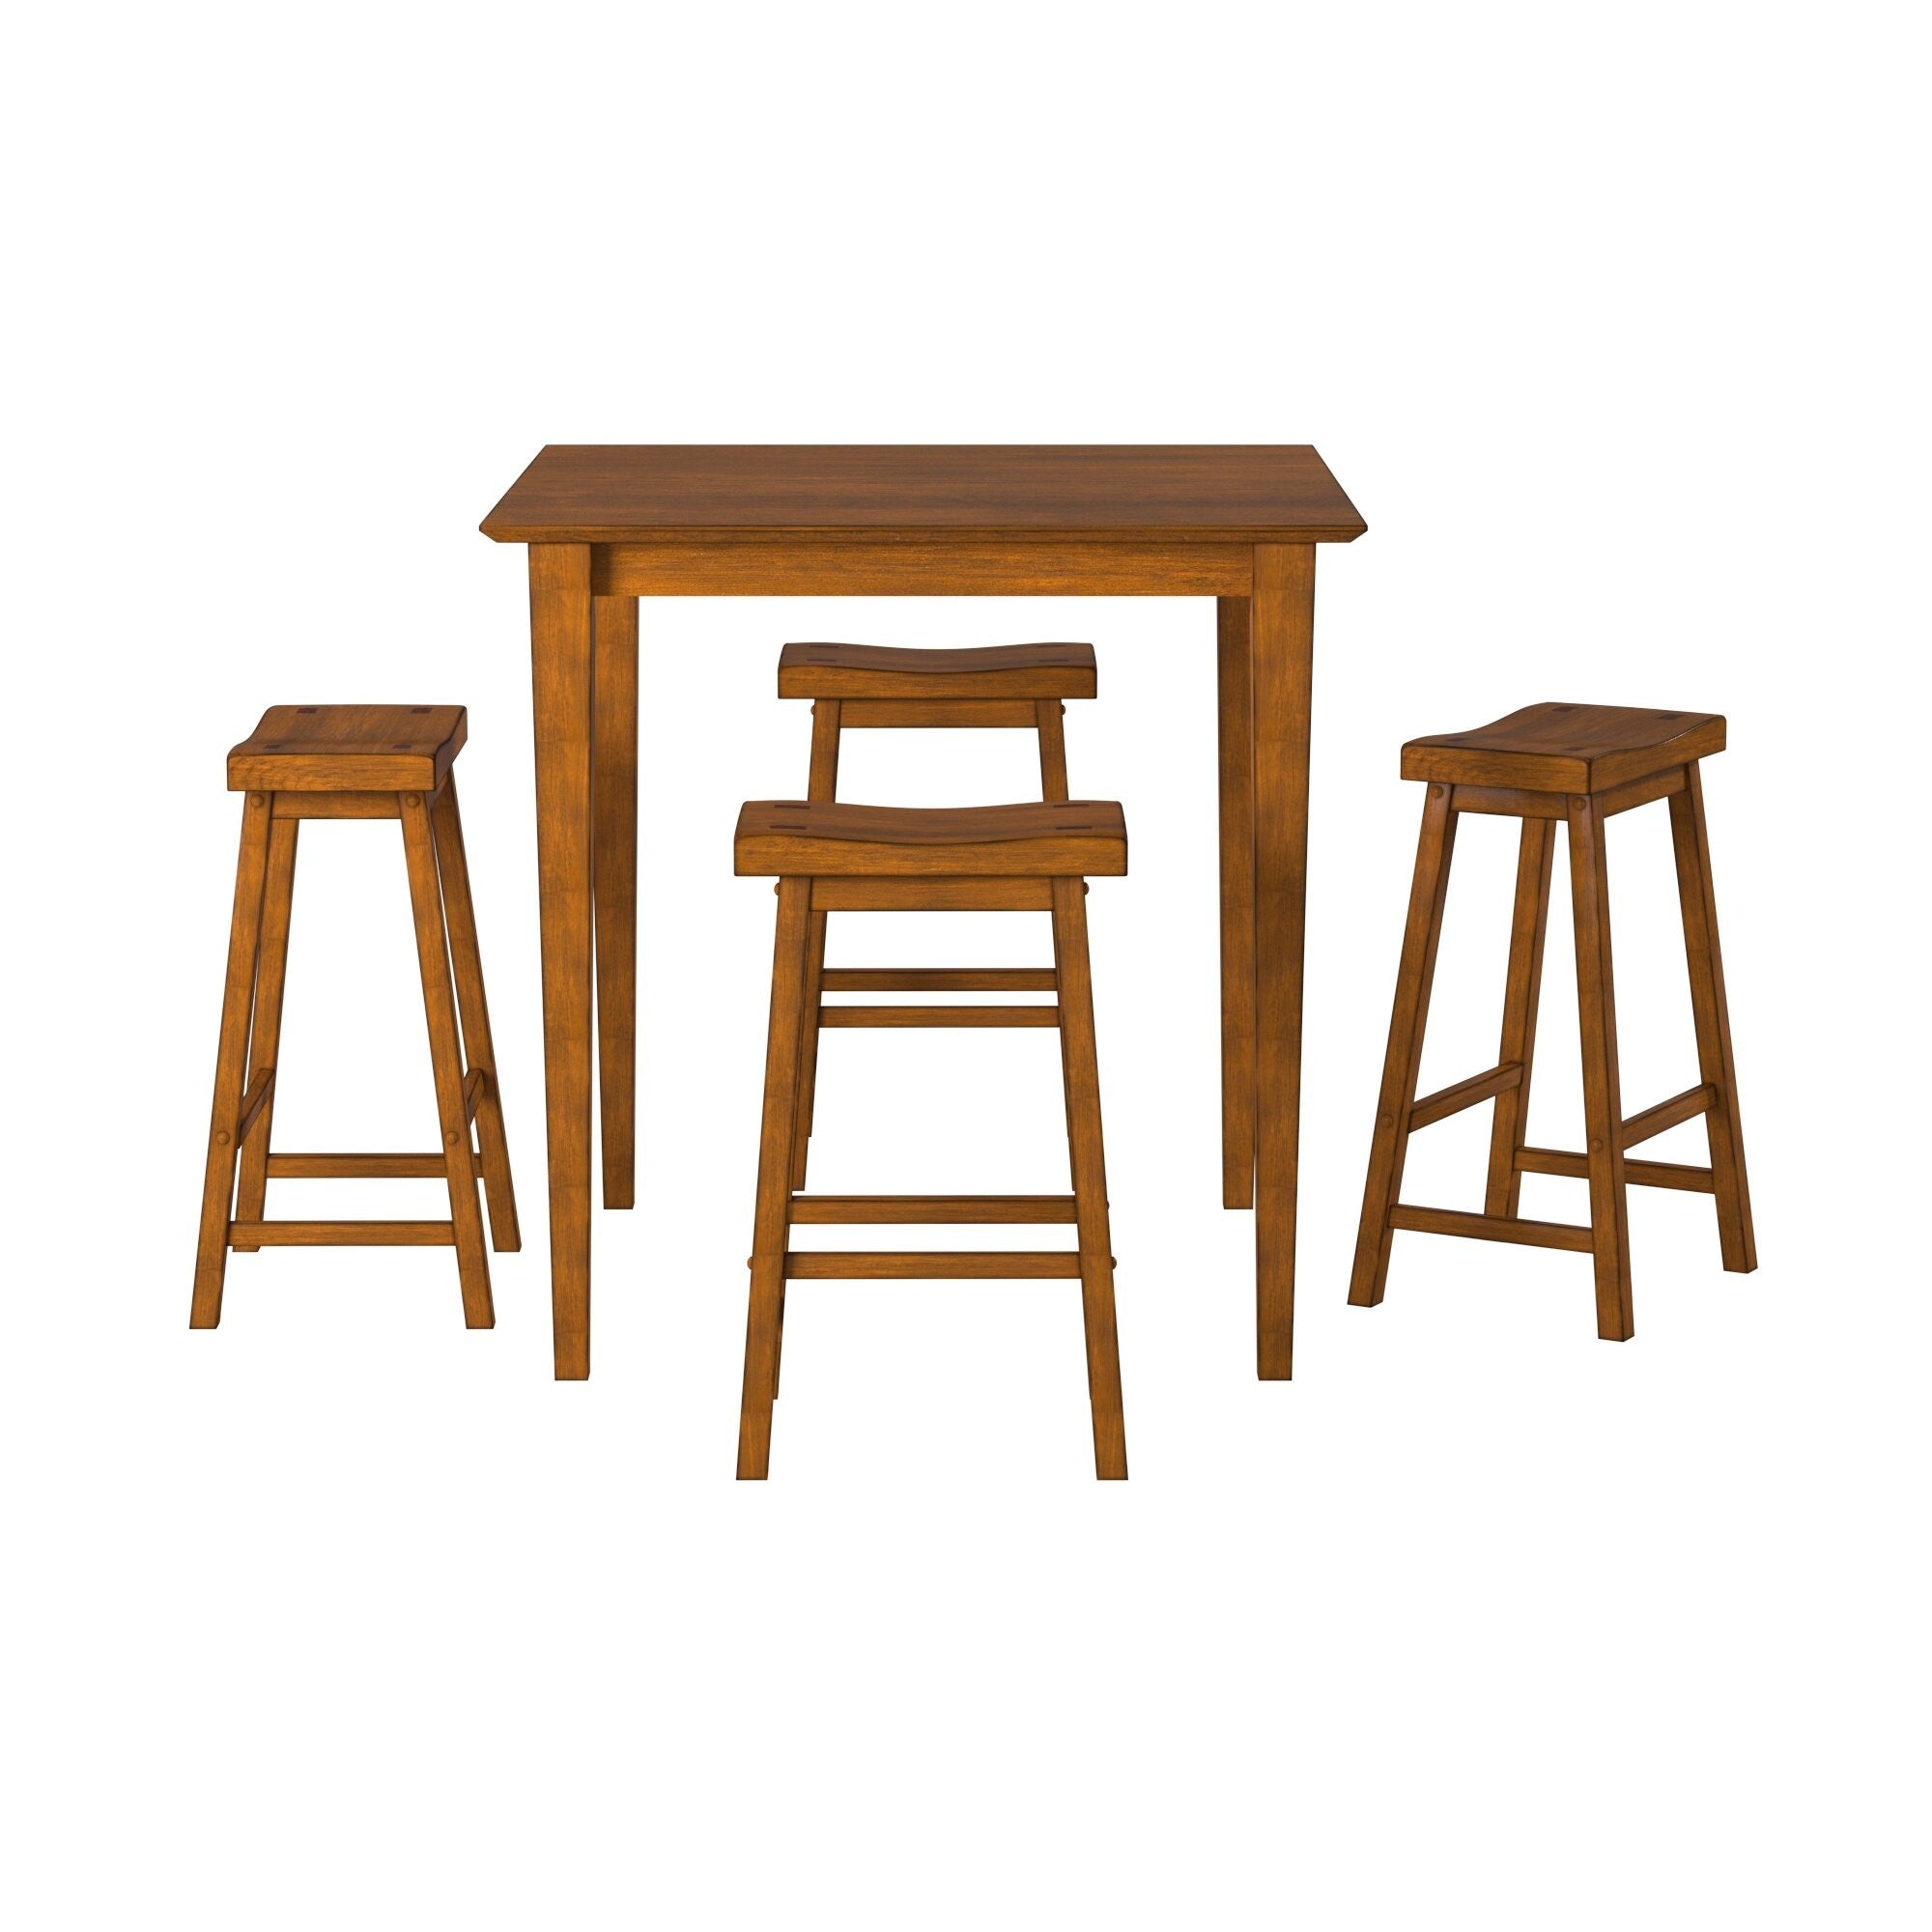 Casual Dining 29 inch Bar Height Stools 2pc Set Saddle oak-dining room-solid wood